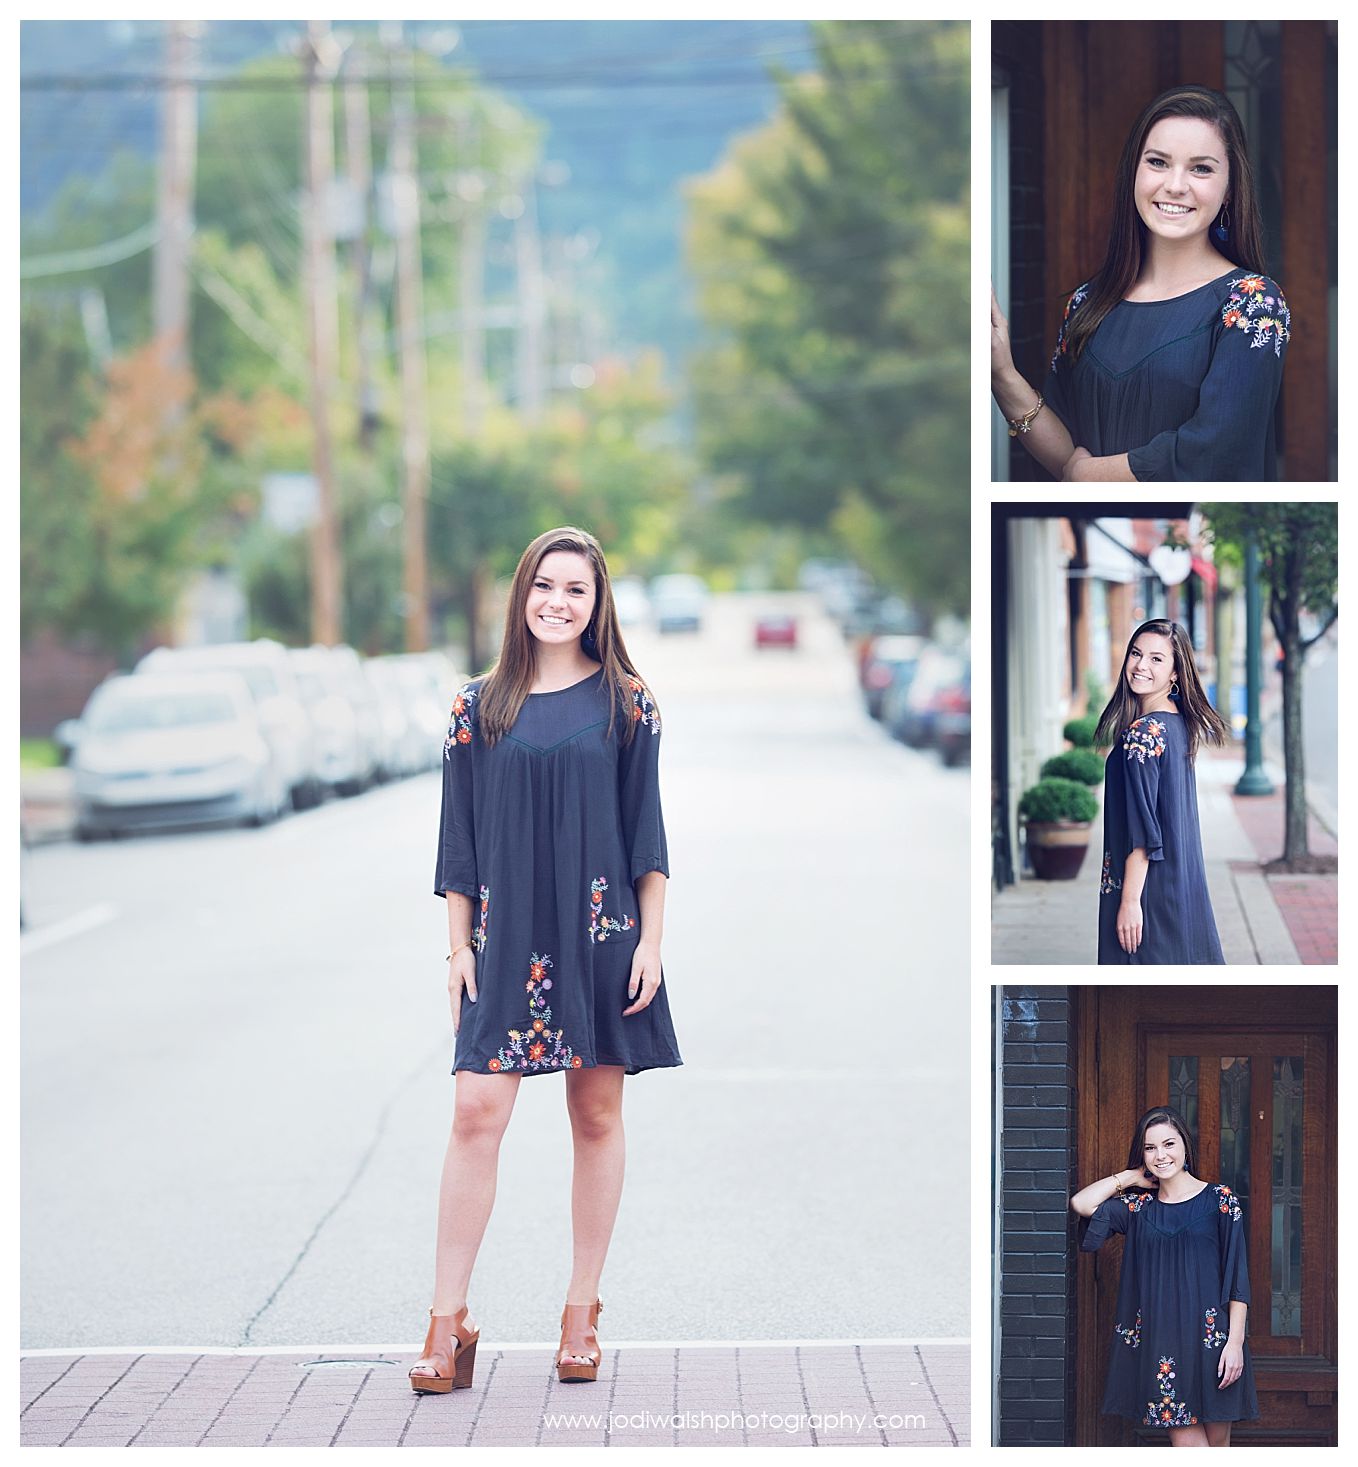 small-town senior portrait in Sewickley.  Collage of images of a senior girl in a gray dress.  She's standing in the street and smiling and walking down the sidewalk.